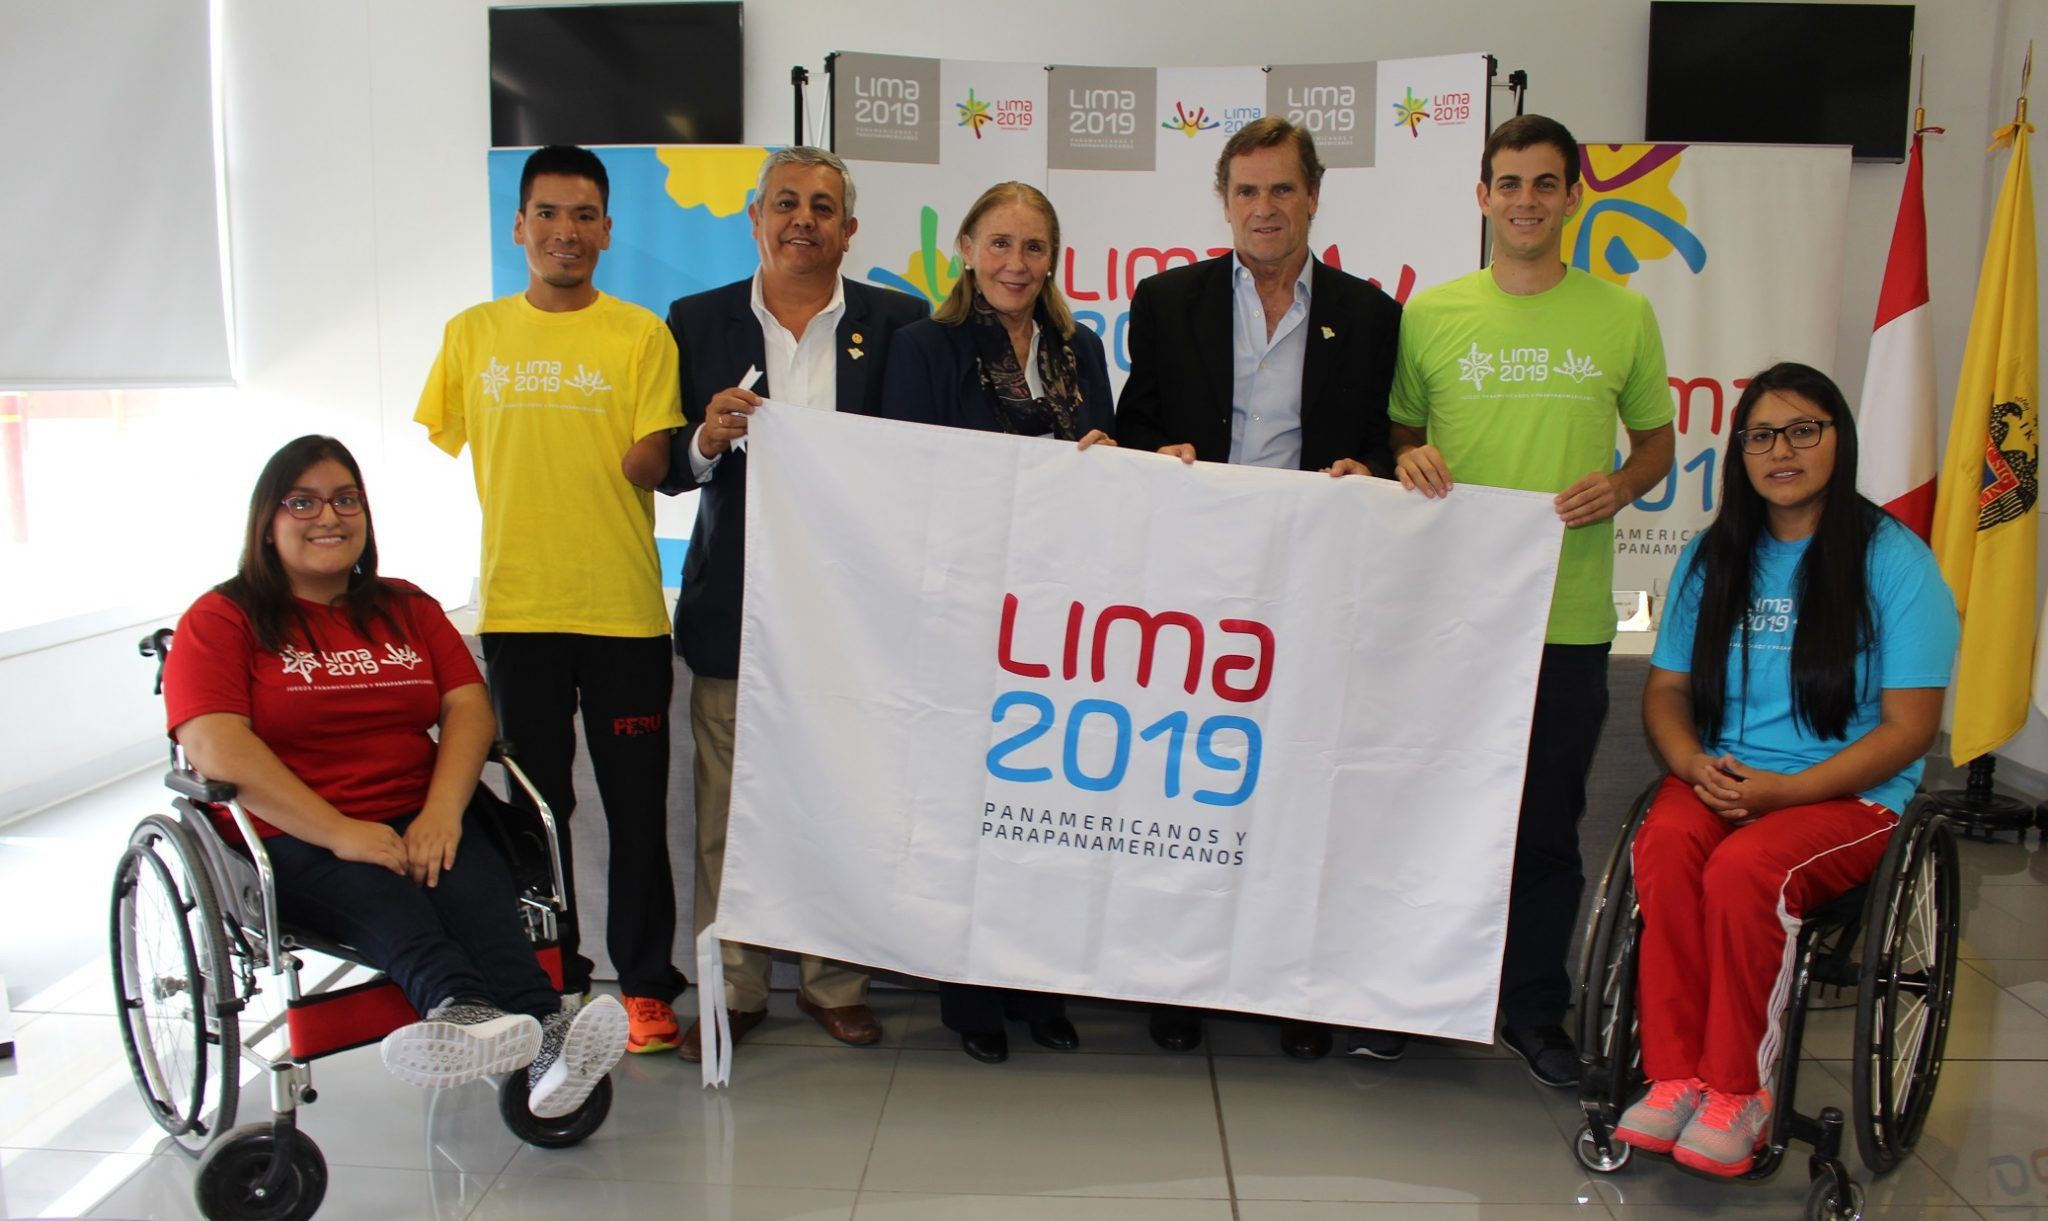 Lima 2019 Parapan American Games stages workshop demonstration of sports events for local leaders